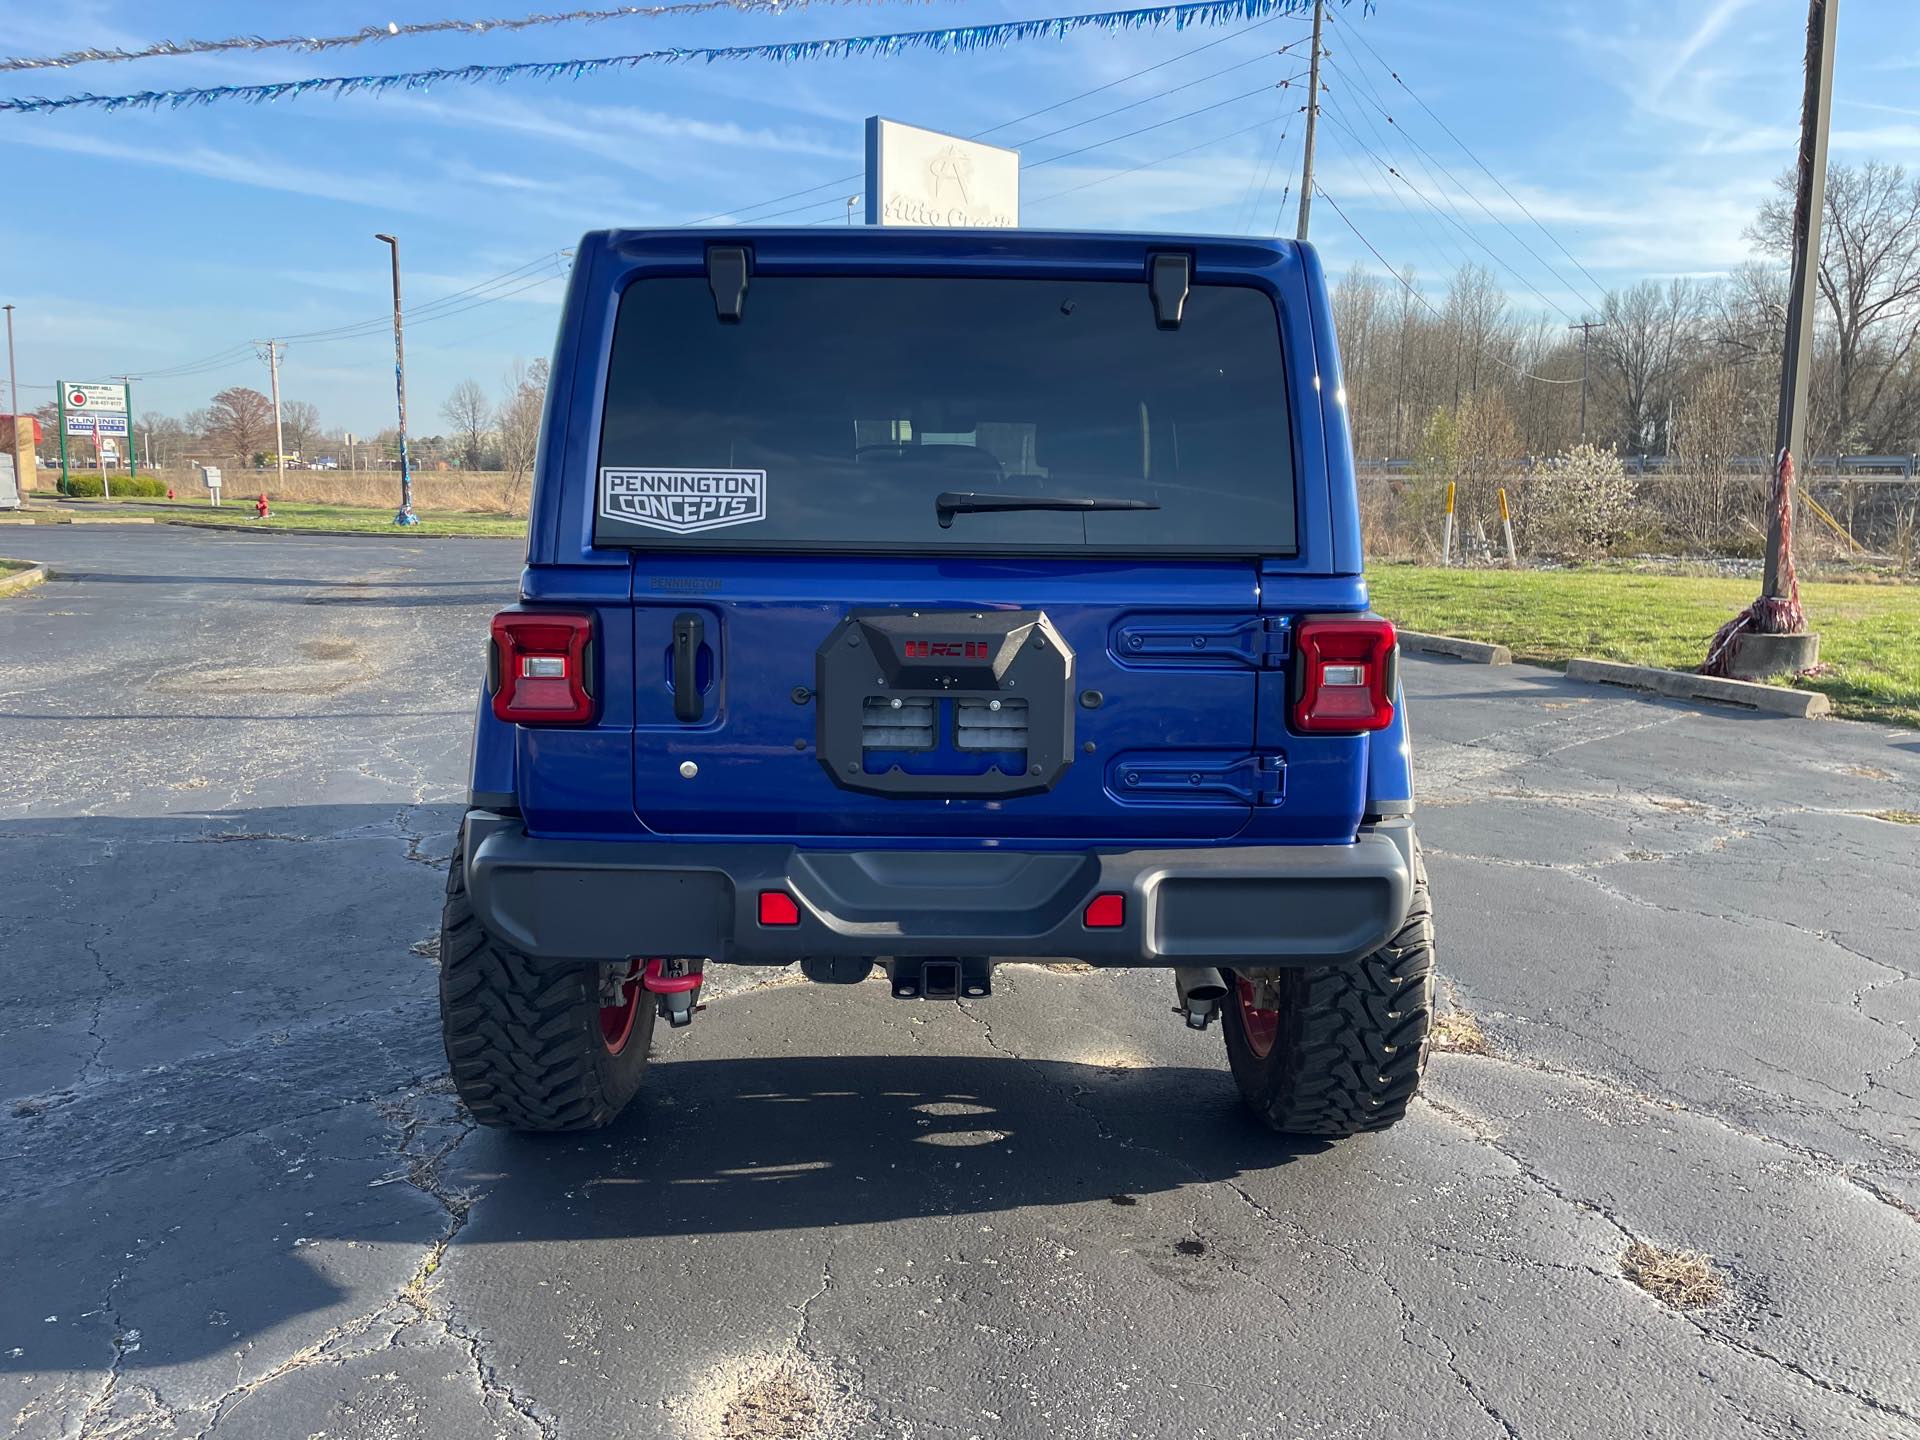 2019 Jeep Wrangler Unlimited at Southern Illinois Motorsports